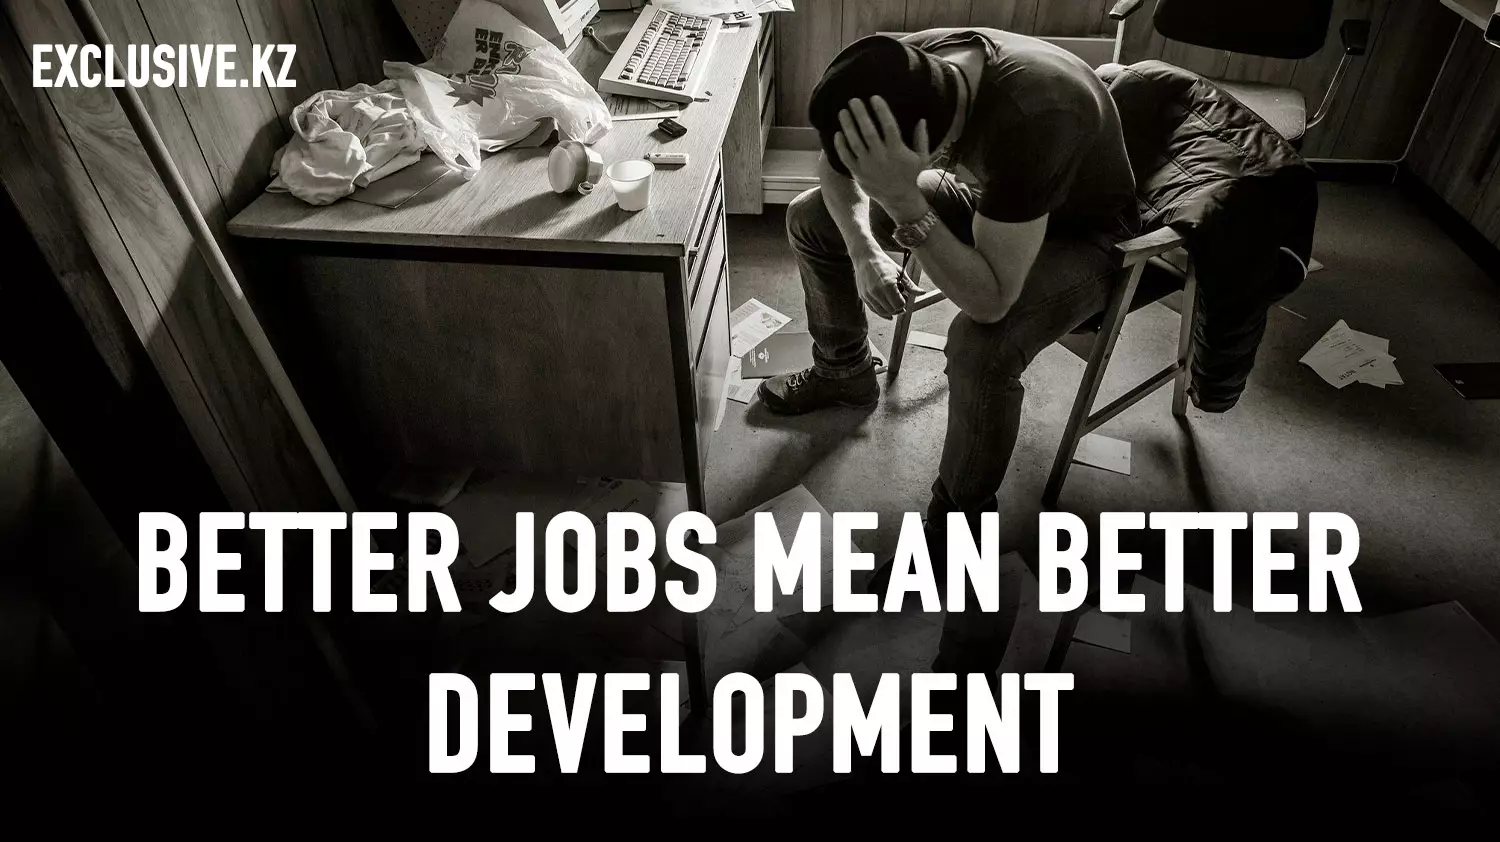 When decent jobs disappear, there are far-reaching social and political effects